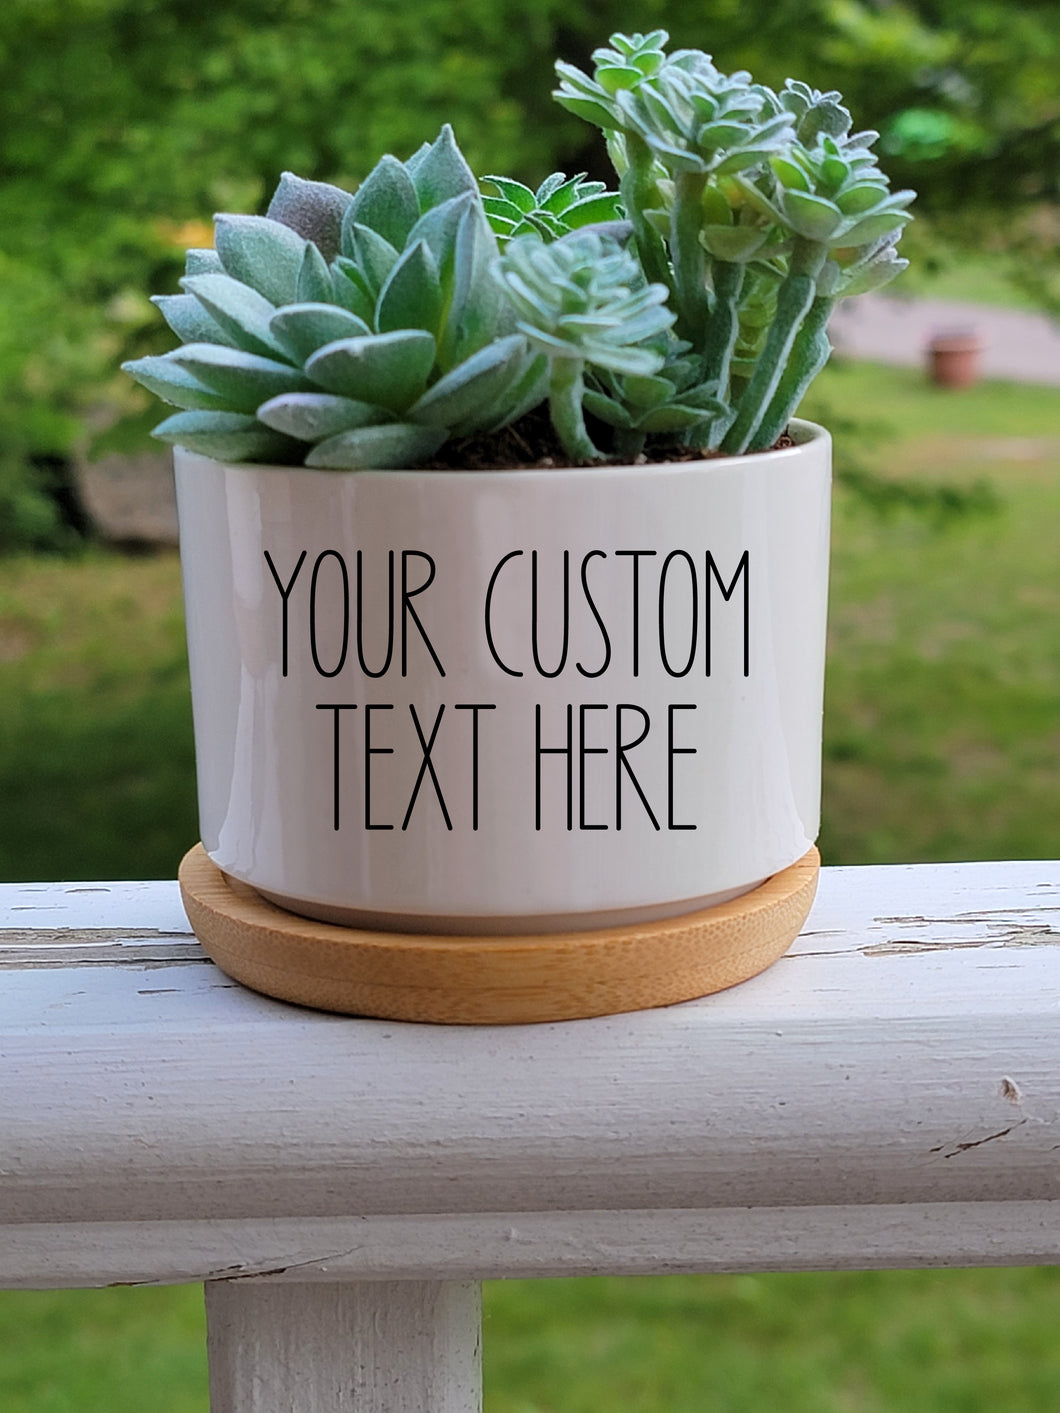 Small white round succulent pot with your custom text added.